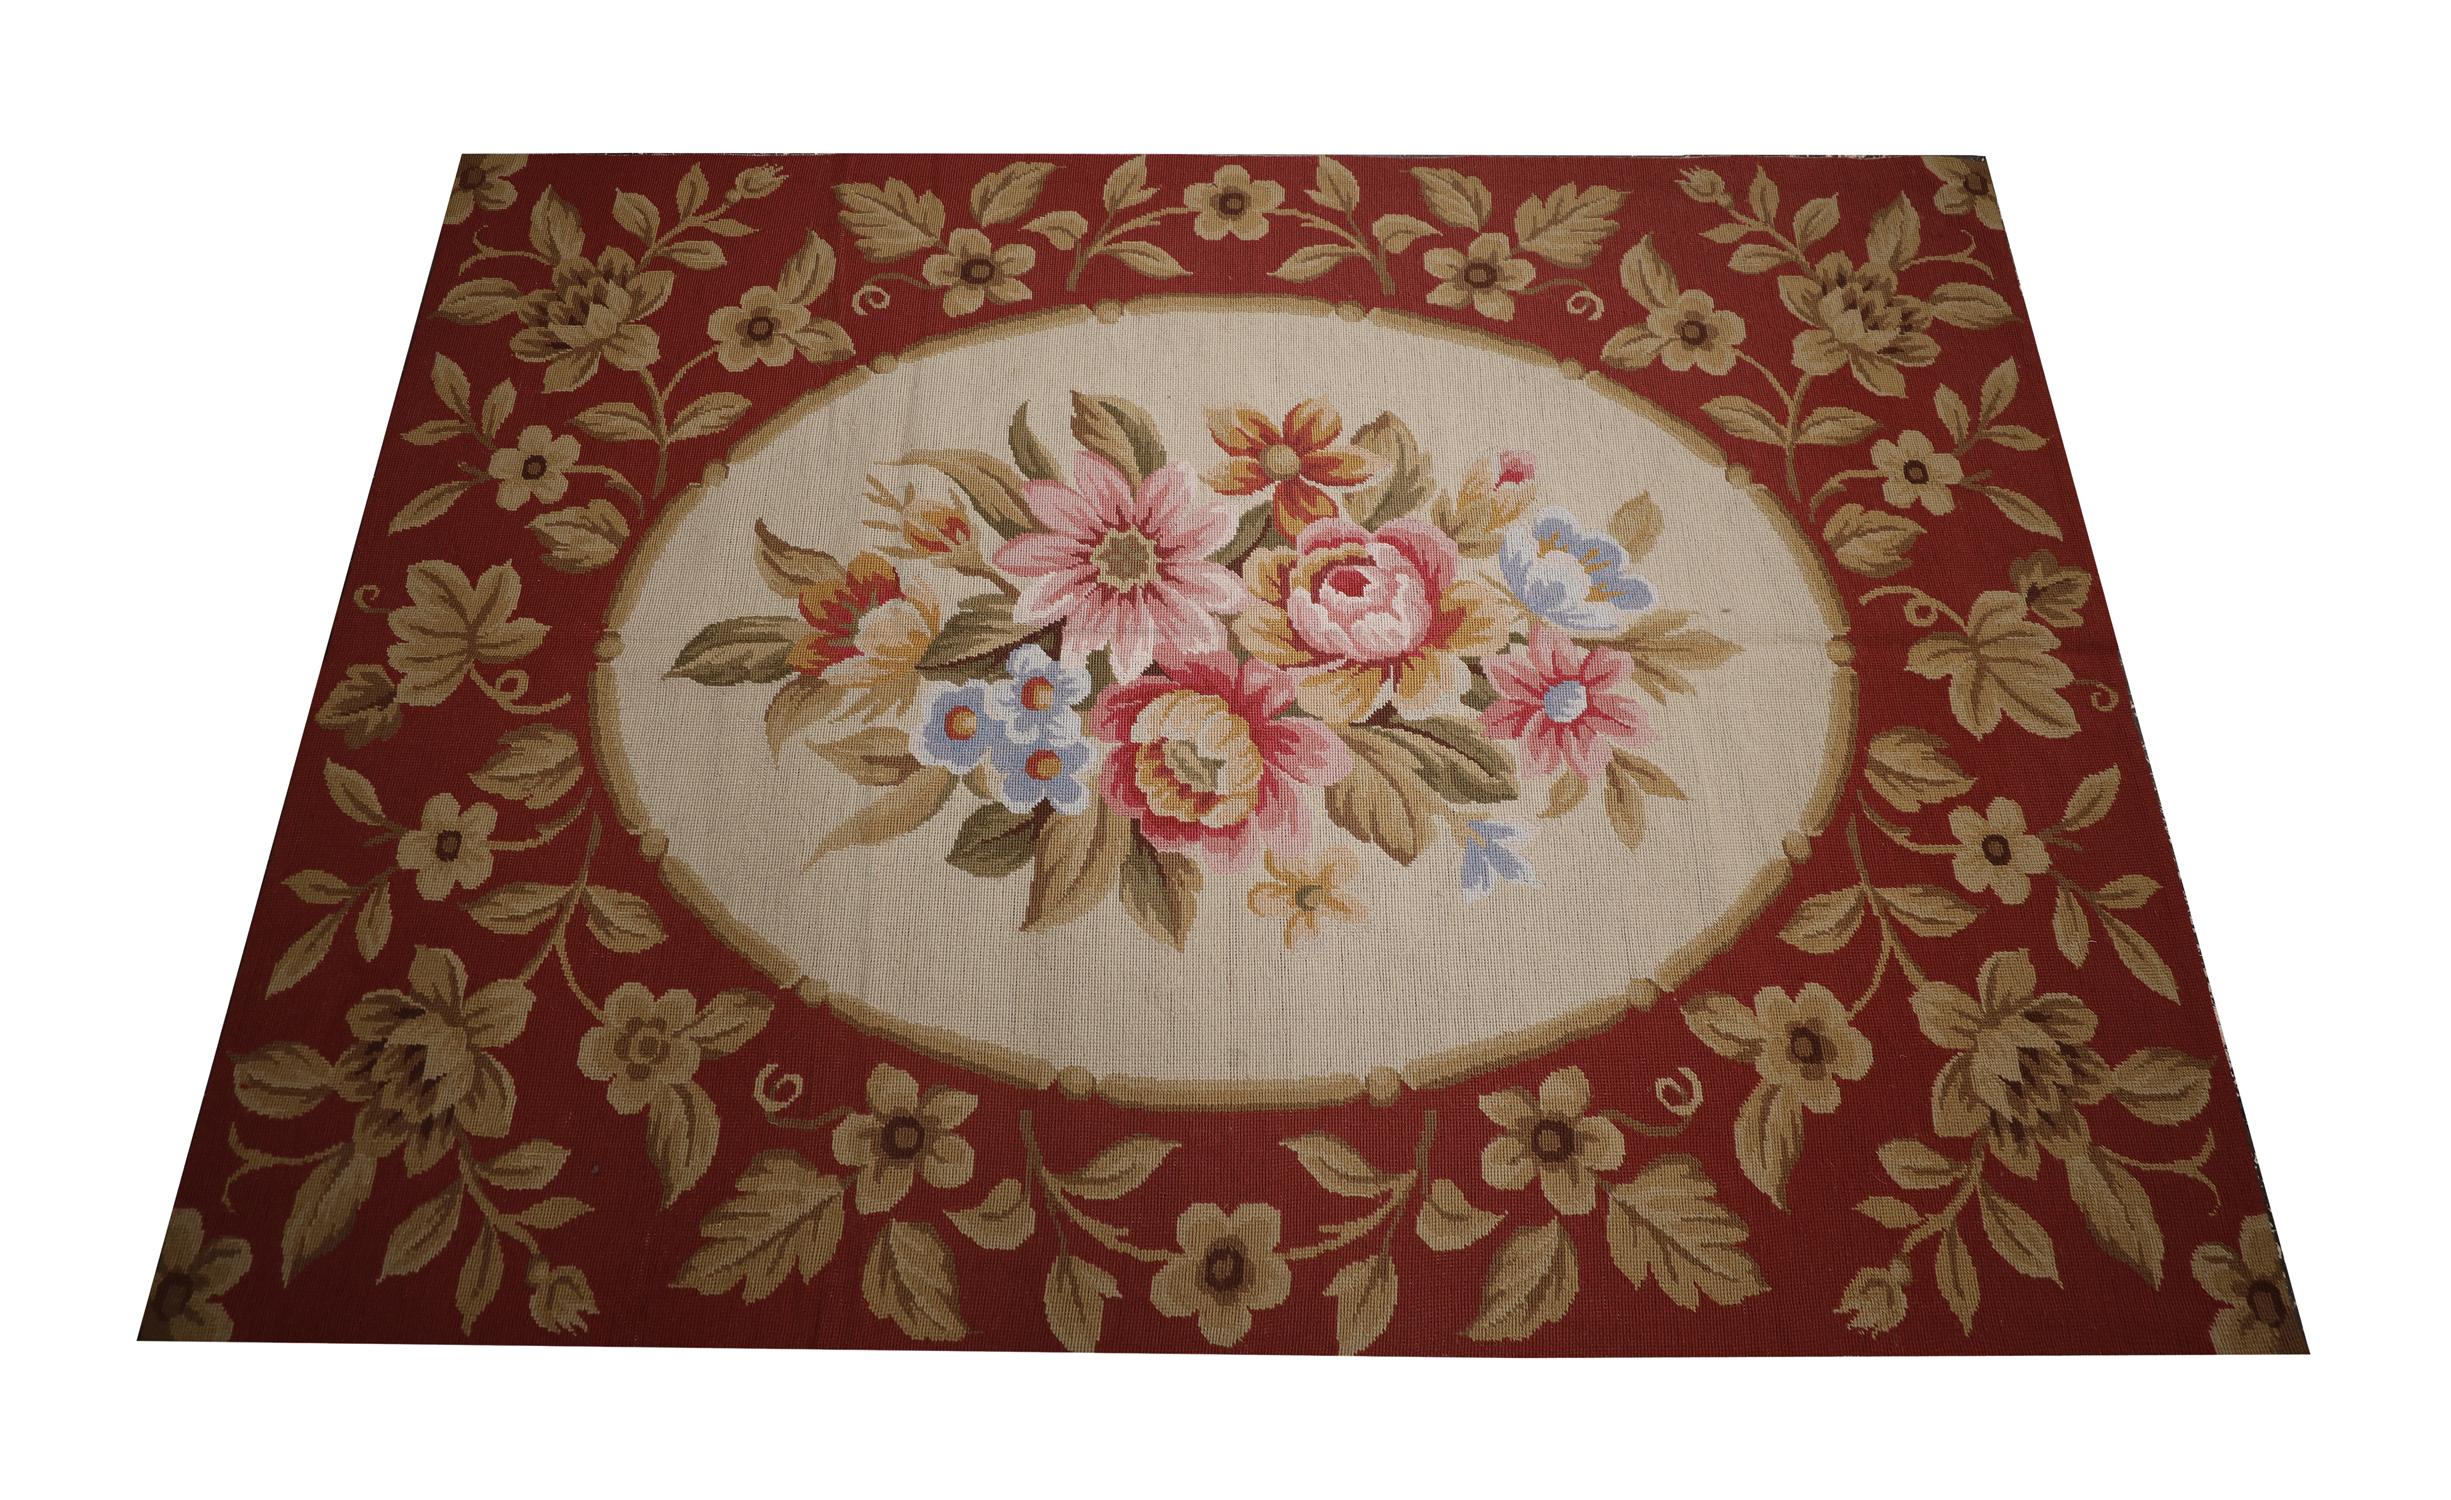 This New English Style Needlepoint was handwoven in the early 21st century and featured a traditional country house design with an oval central medallion and symmetrical surrounding design. Woven with an elegant colour palette of deep red, beige and